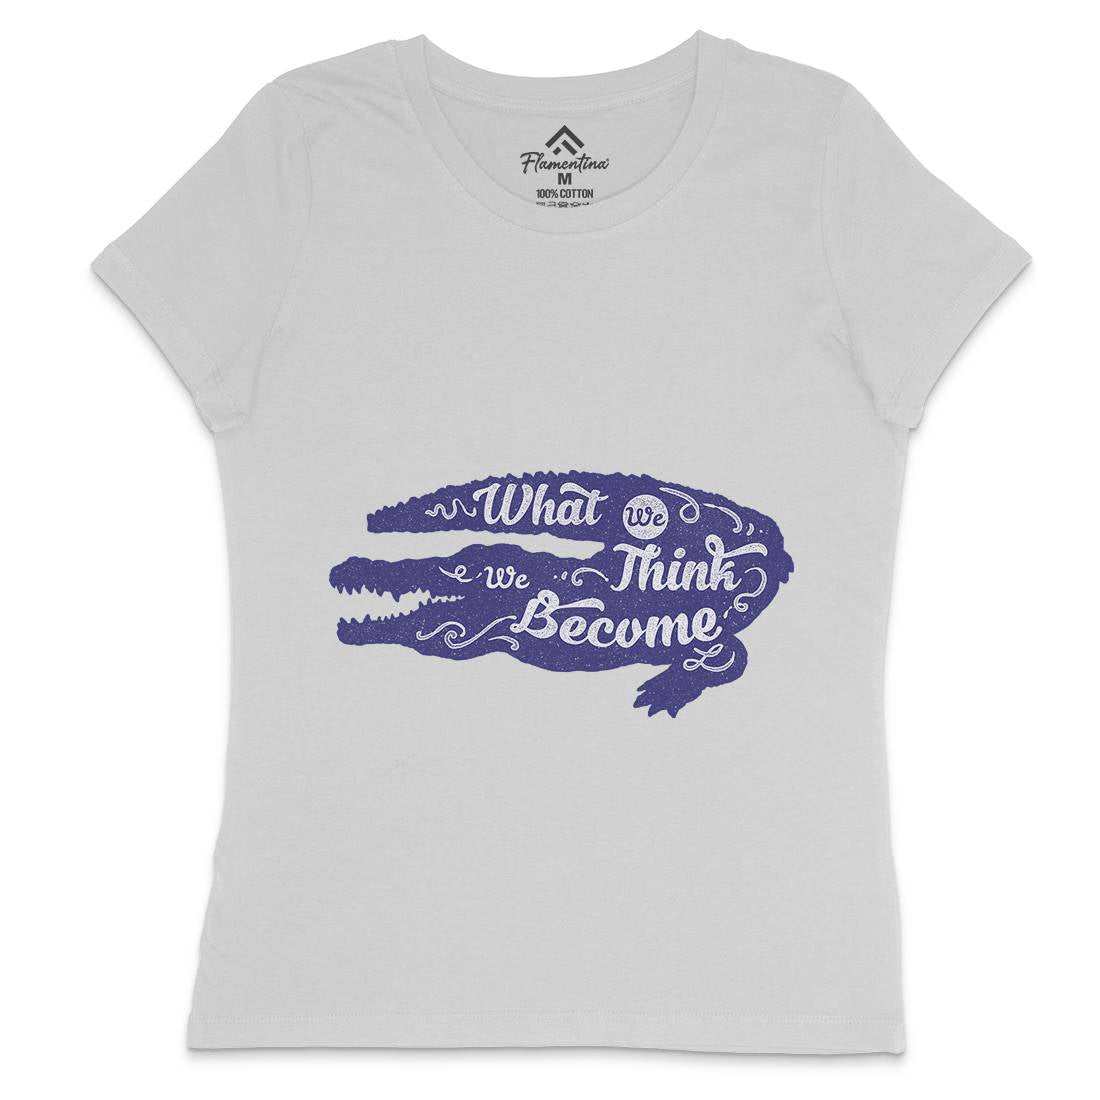 What We Think Womens Crew Neck T-Shirt Quotes A394